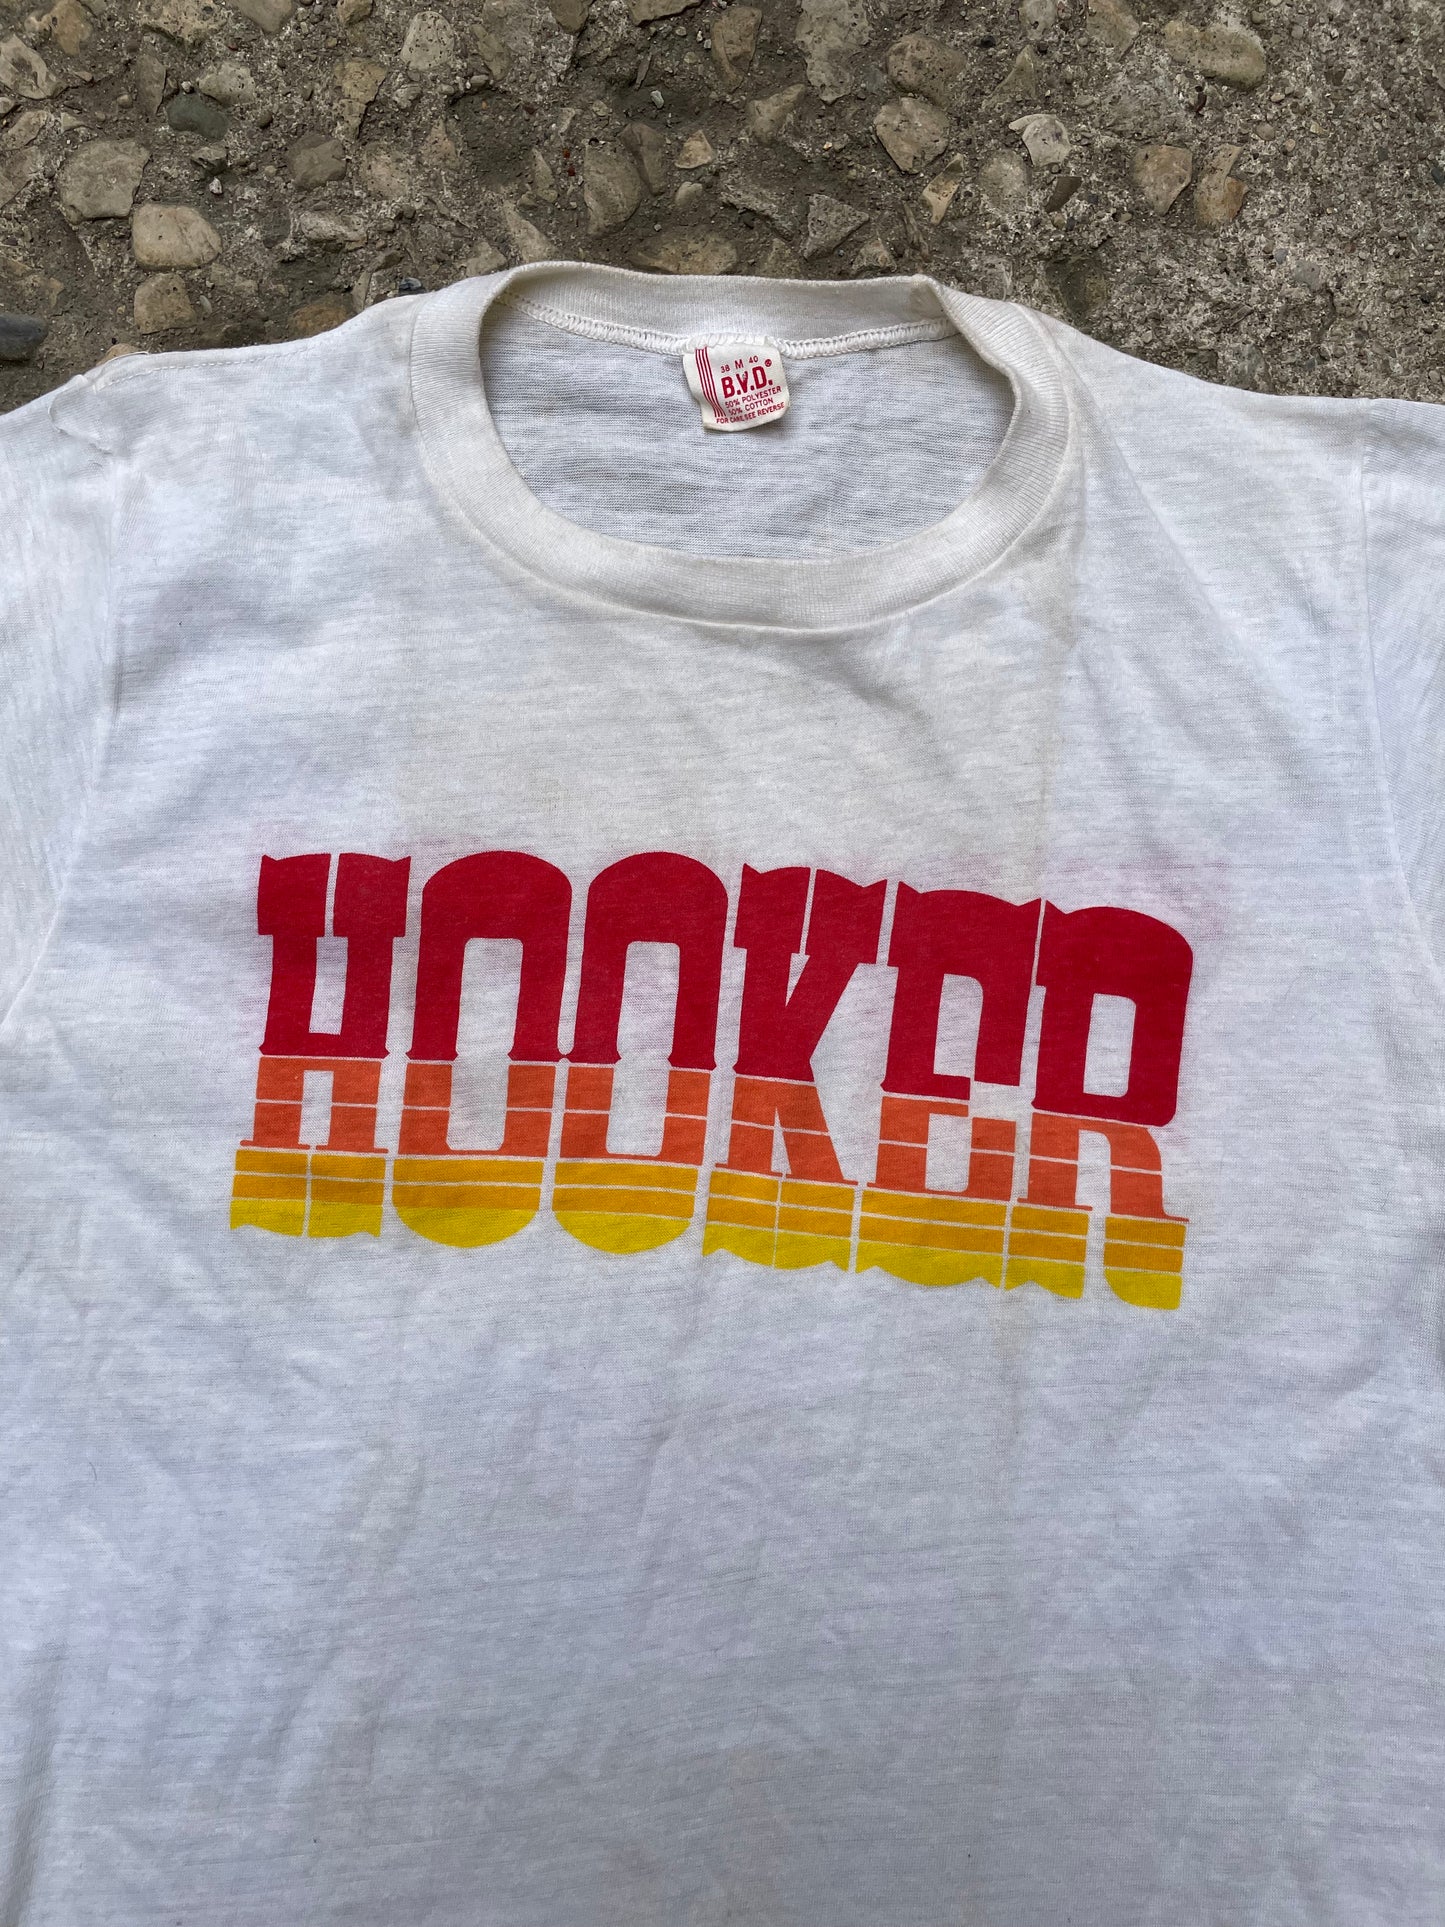 1974 Hooker Headers Indianapolis 500 Graphic T-Shirt - M